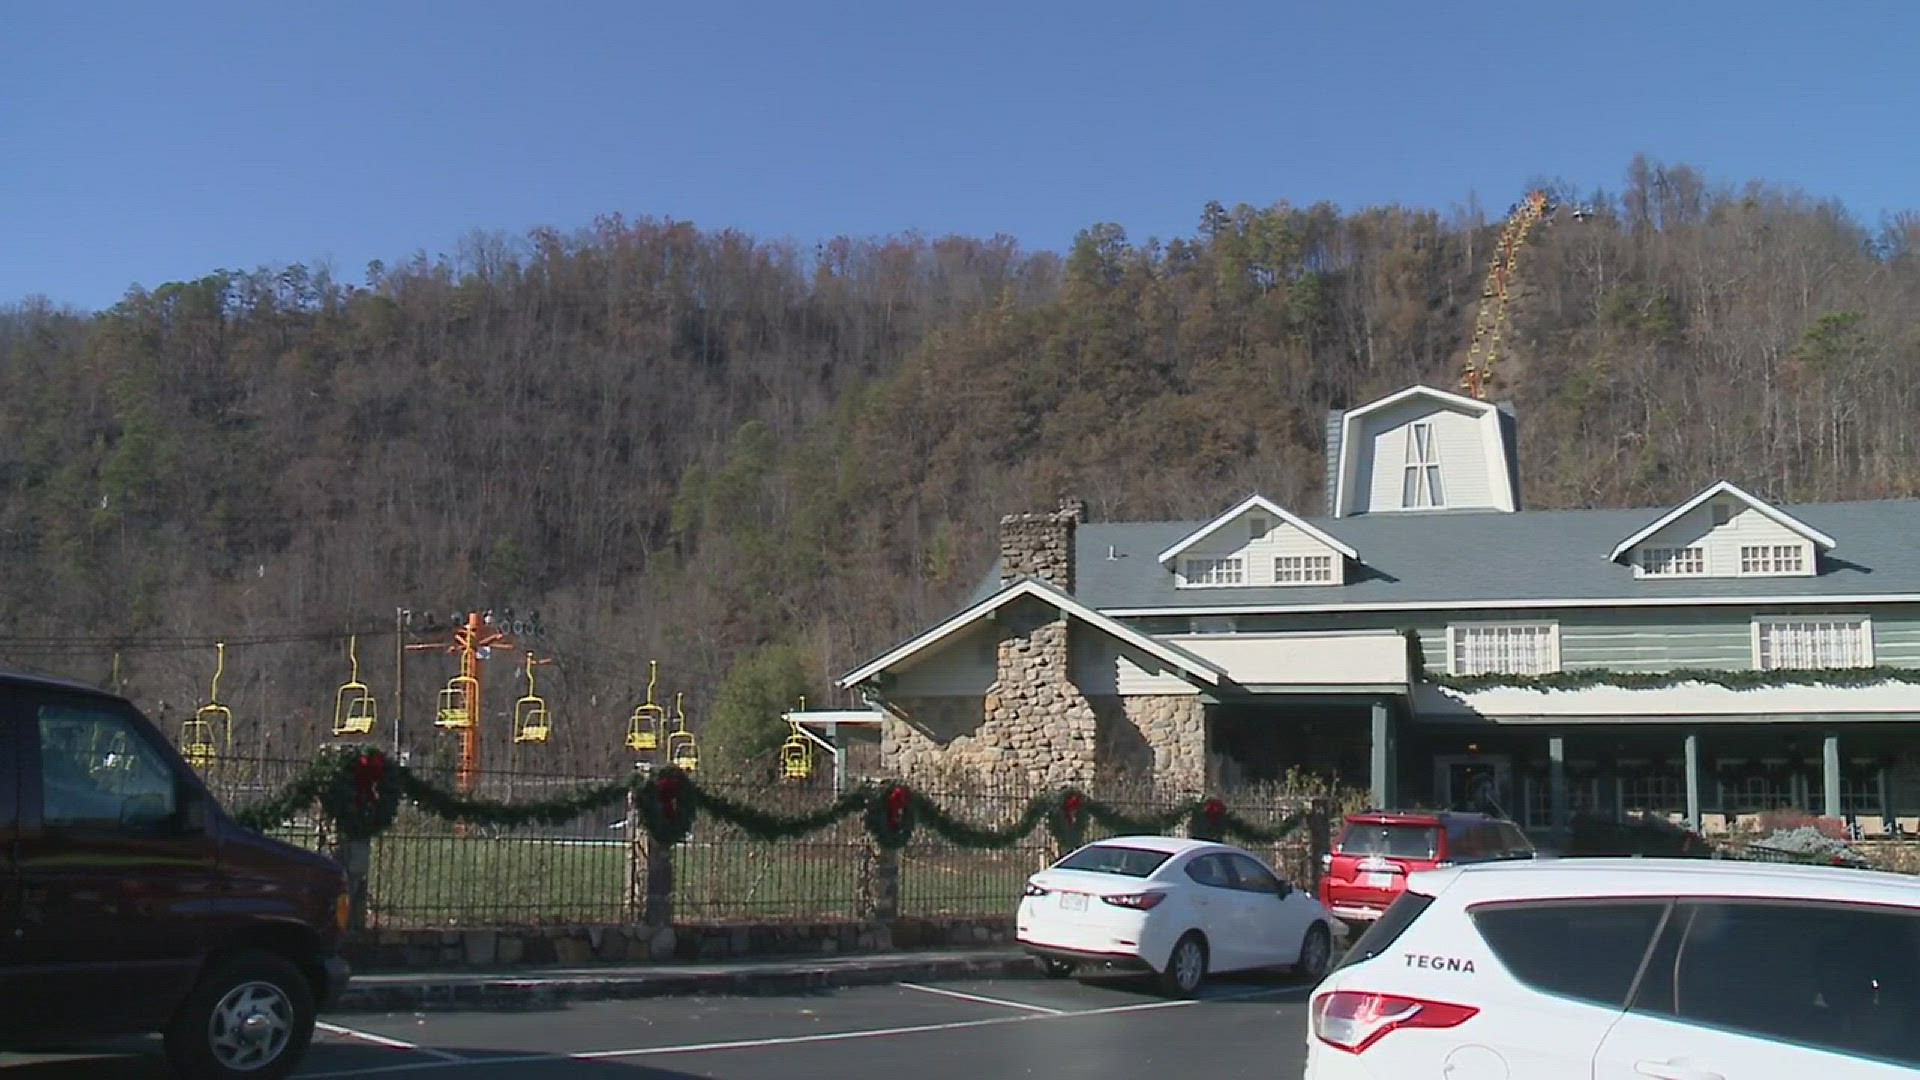 The operators of the Gatlinburg Sky Lift are working to determine whether the attraction can be repaired or will need to be replaced after wildfires impacted the town.